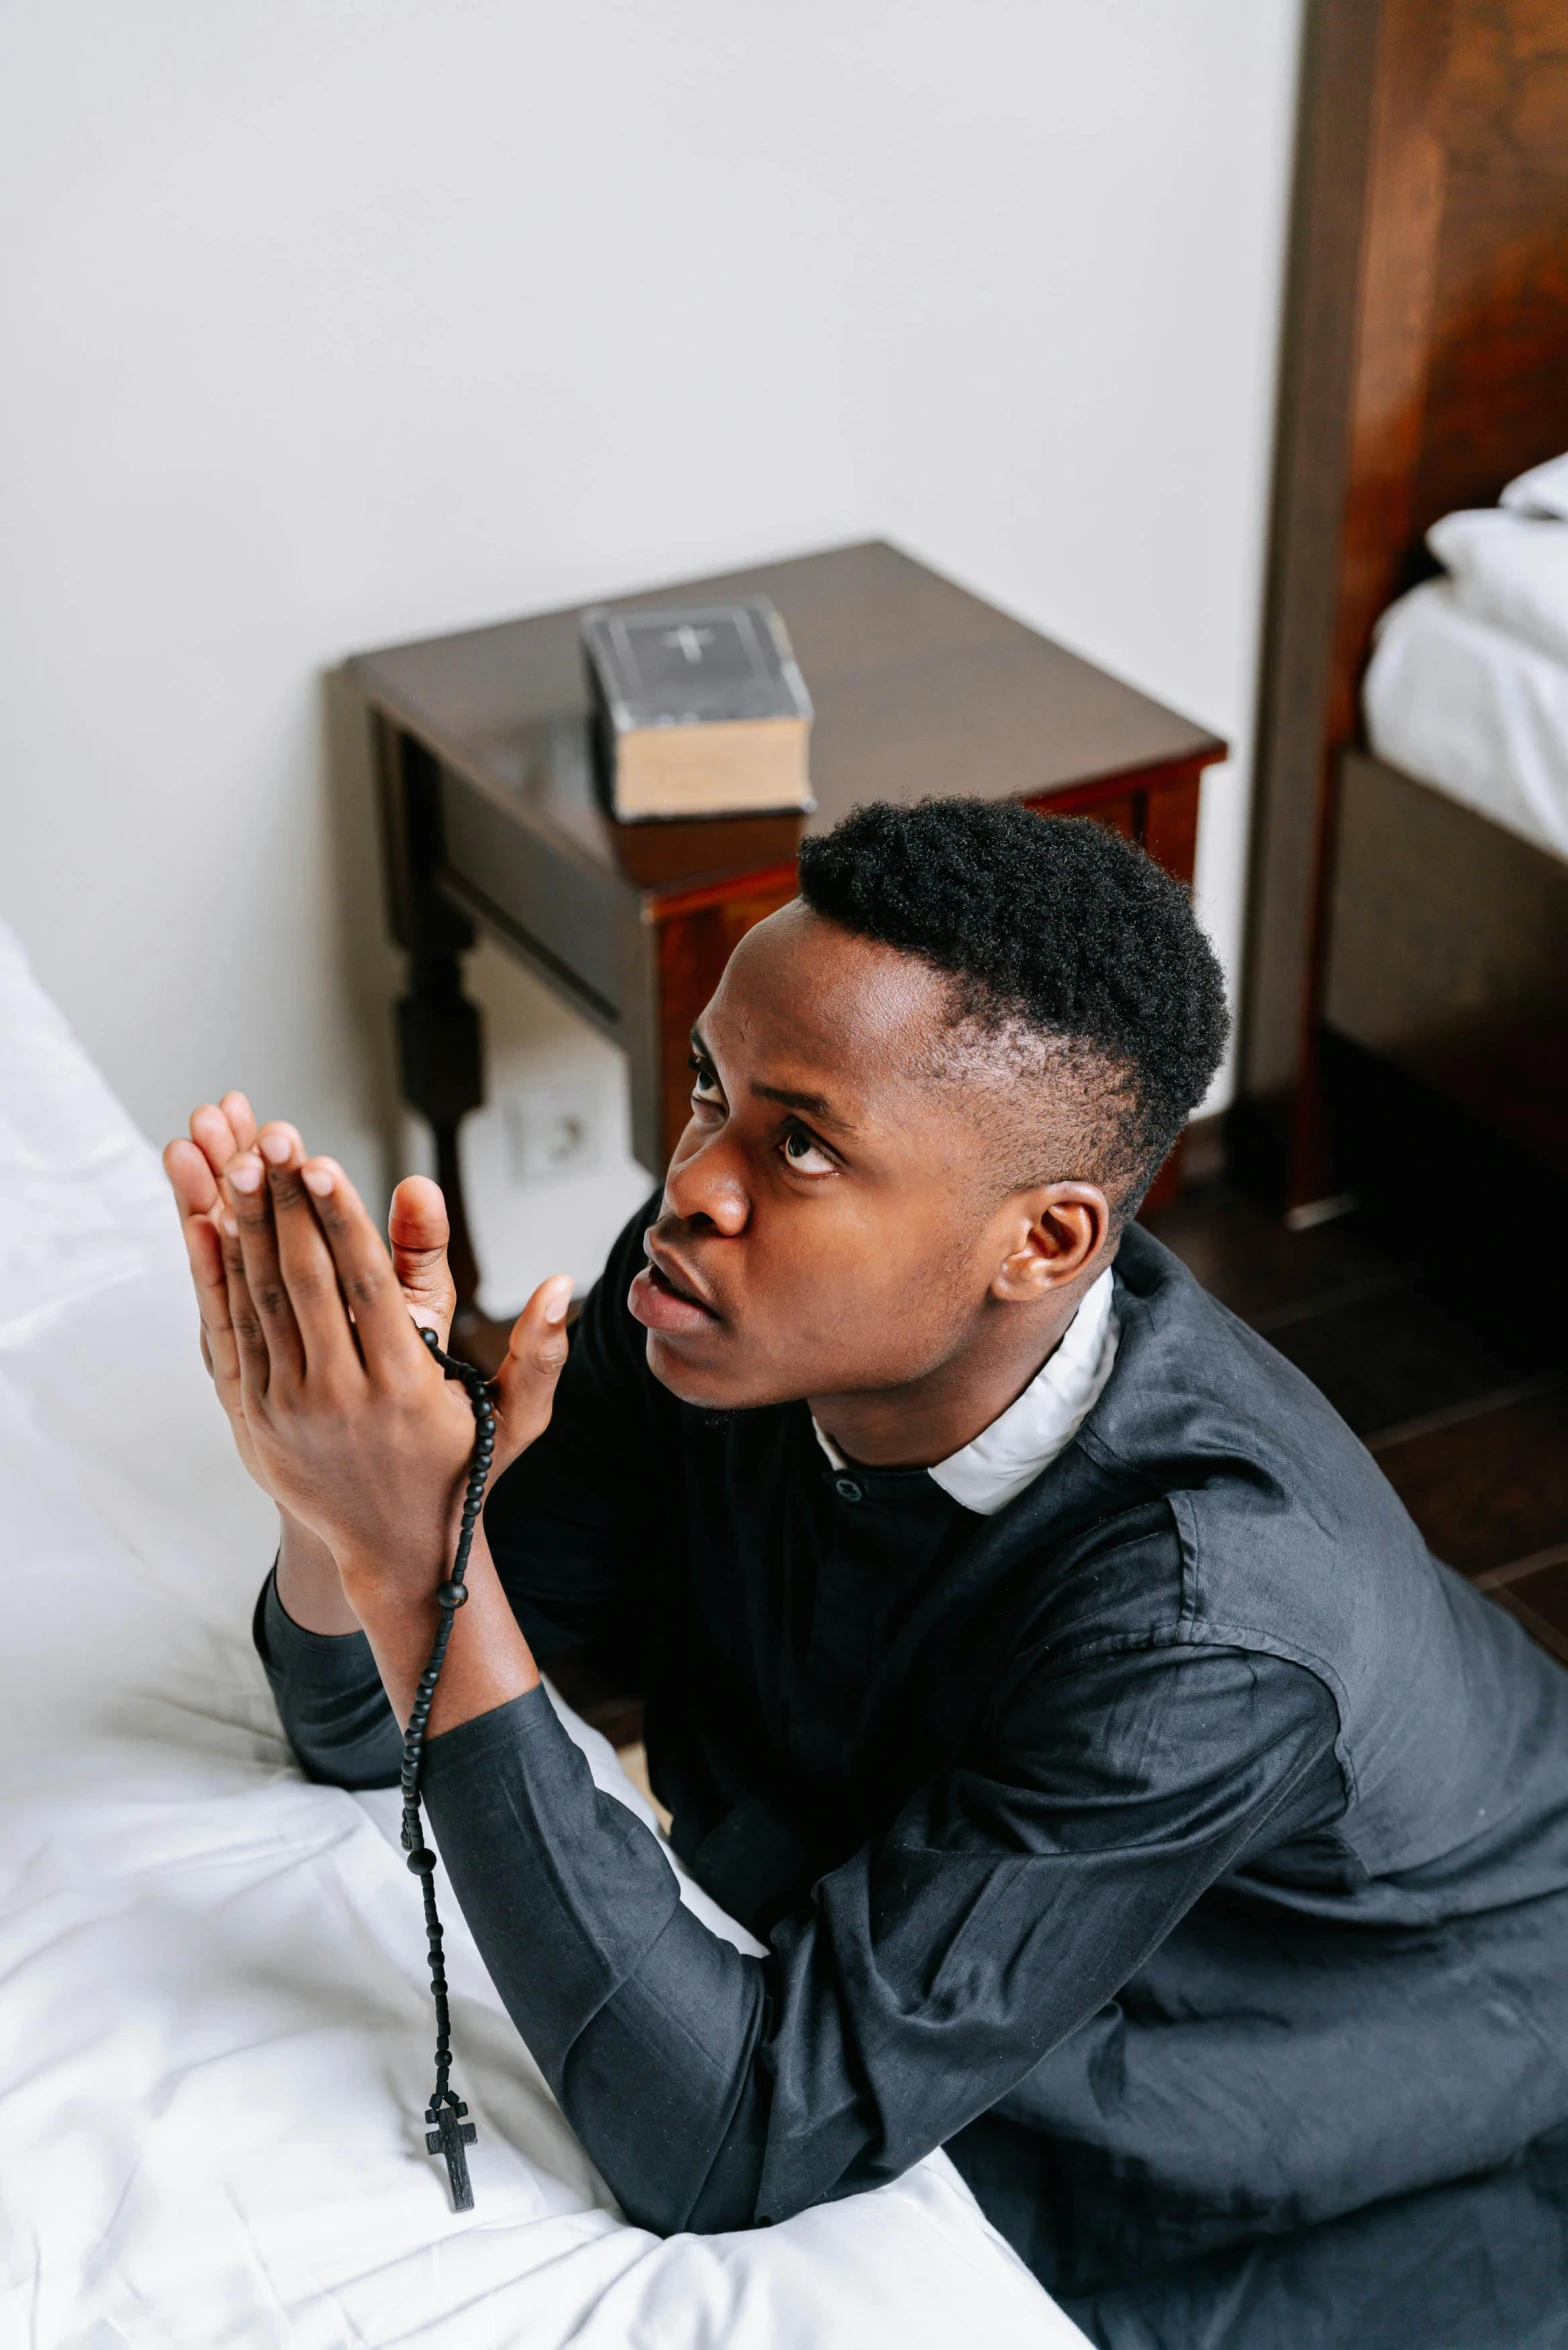 a man wearing a suit is praying on a bed